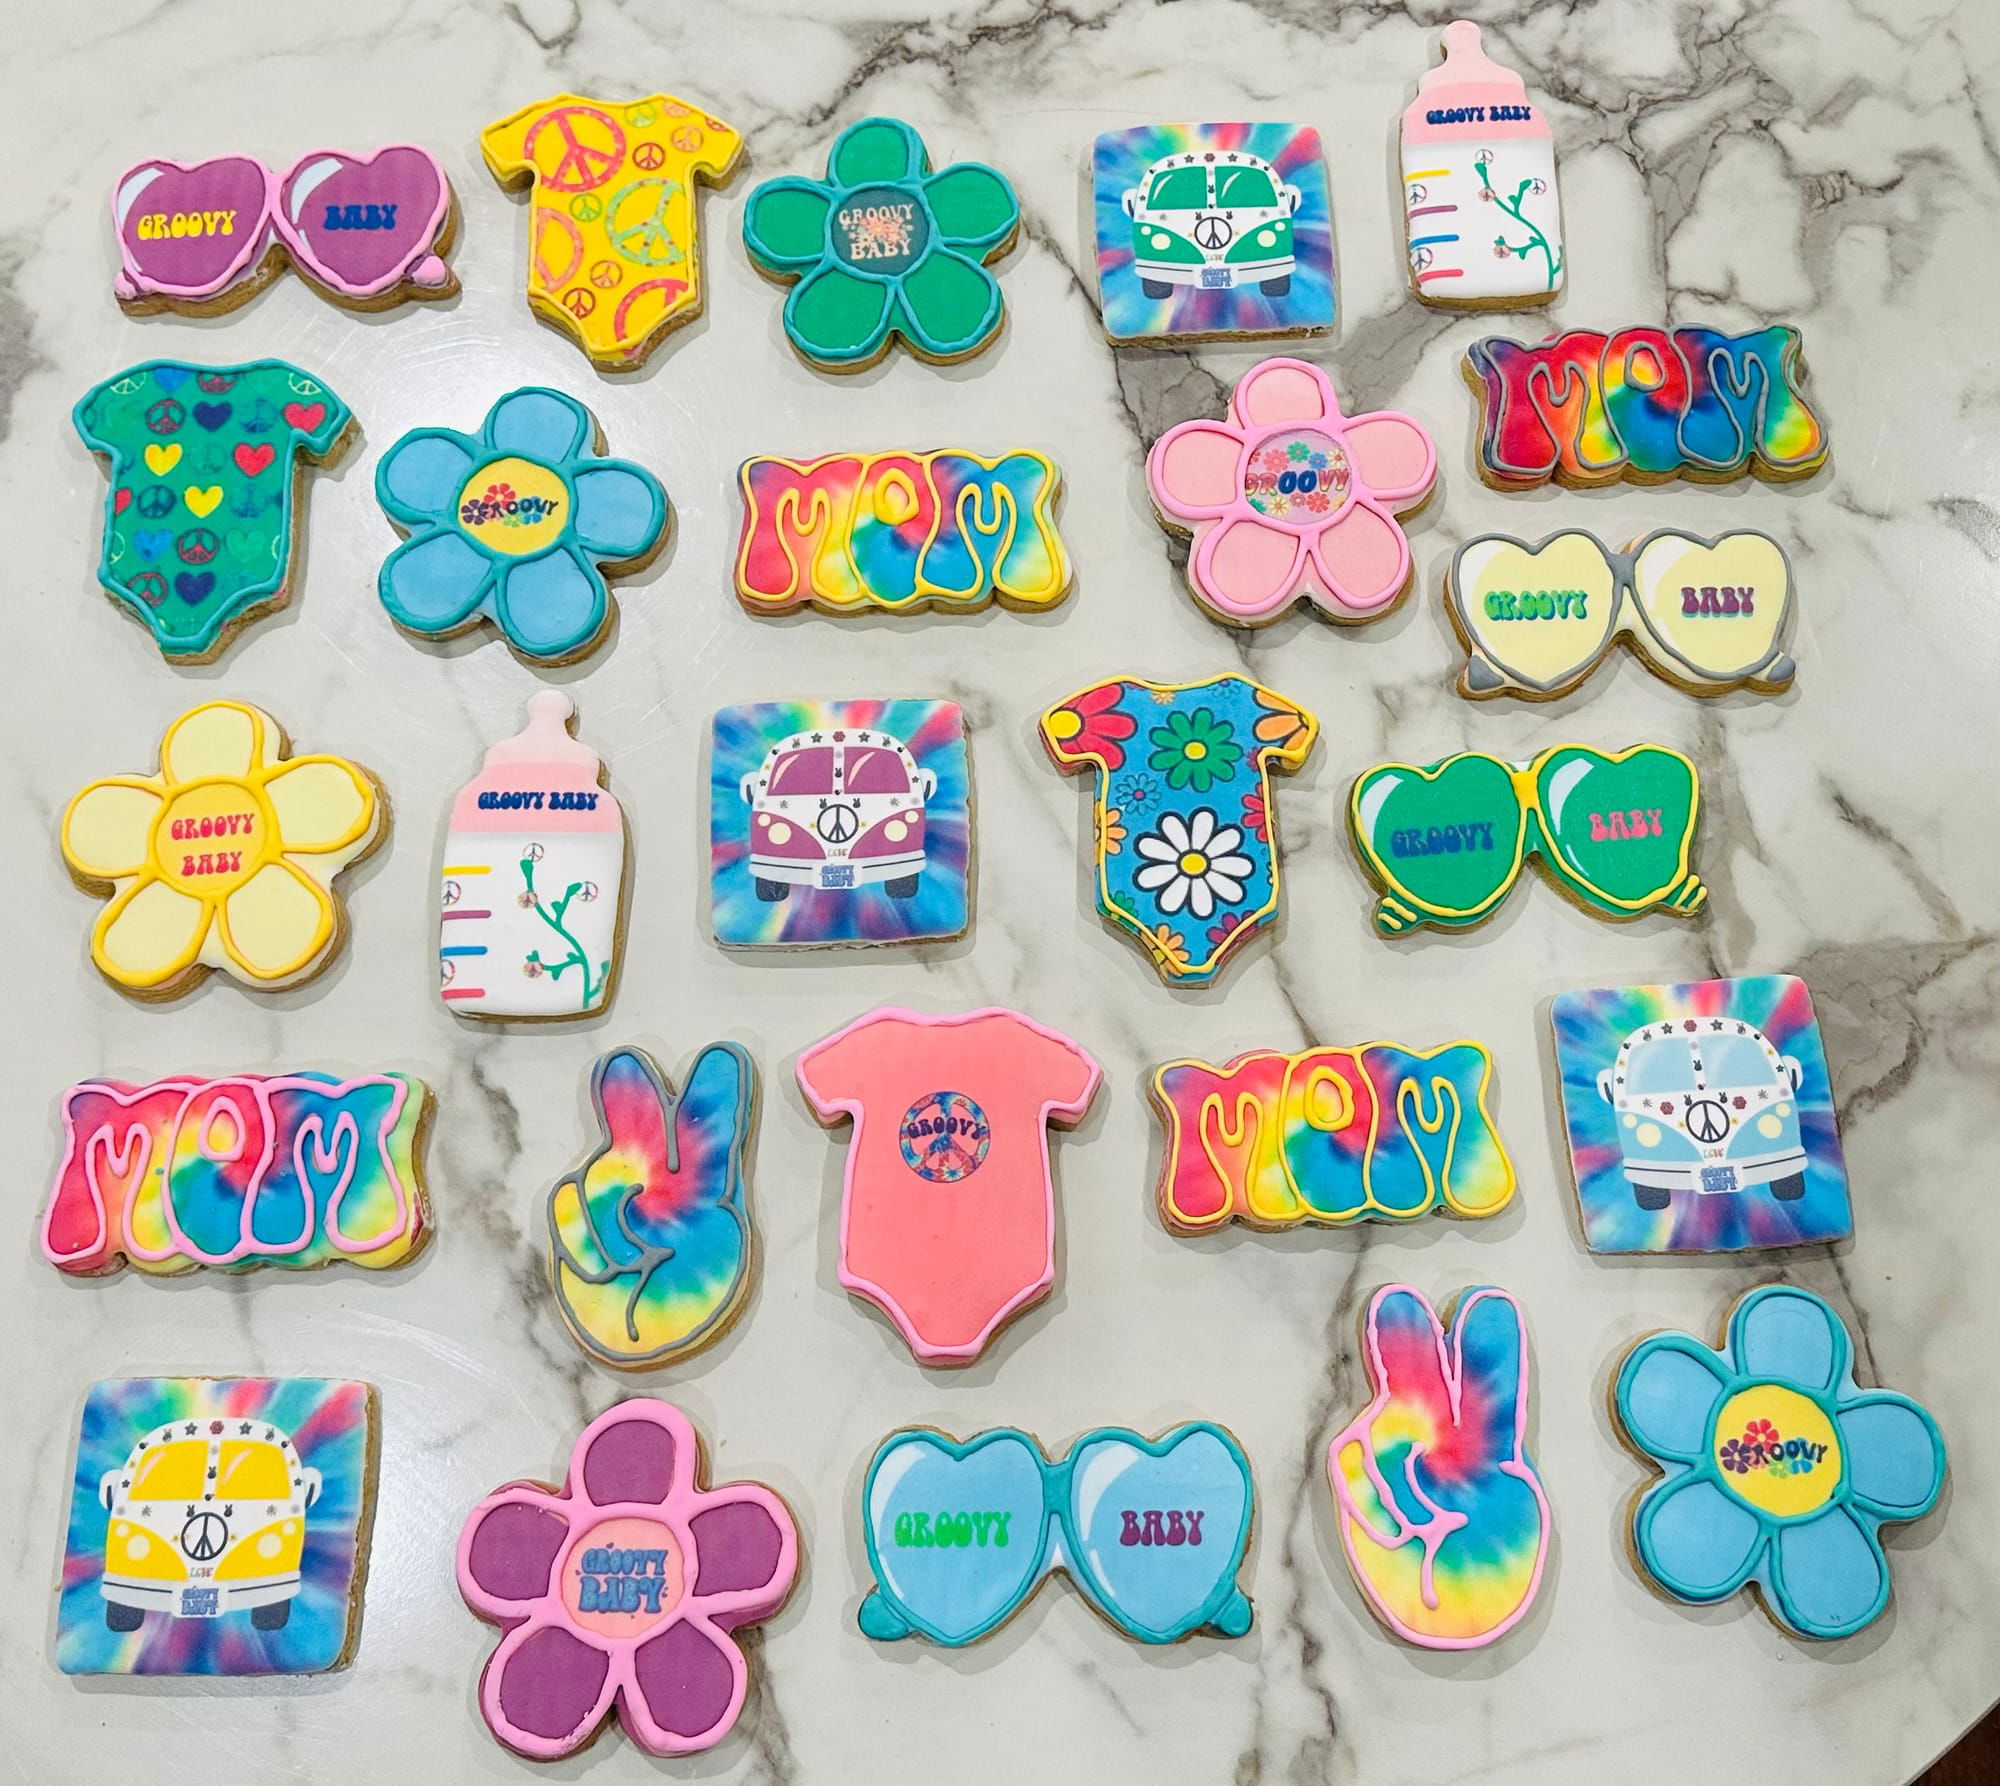 Groovy Baby Shower Royal Icing Sugar Cookies with Images